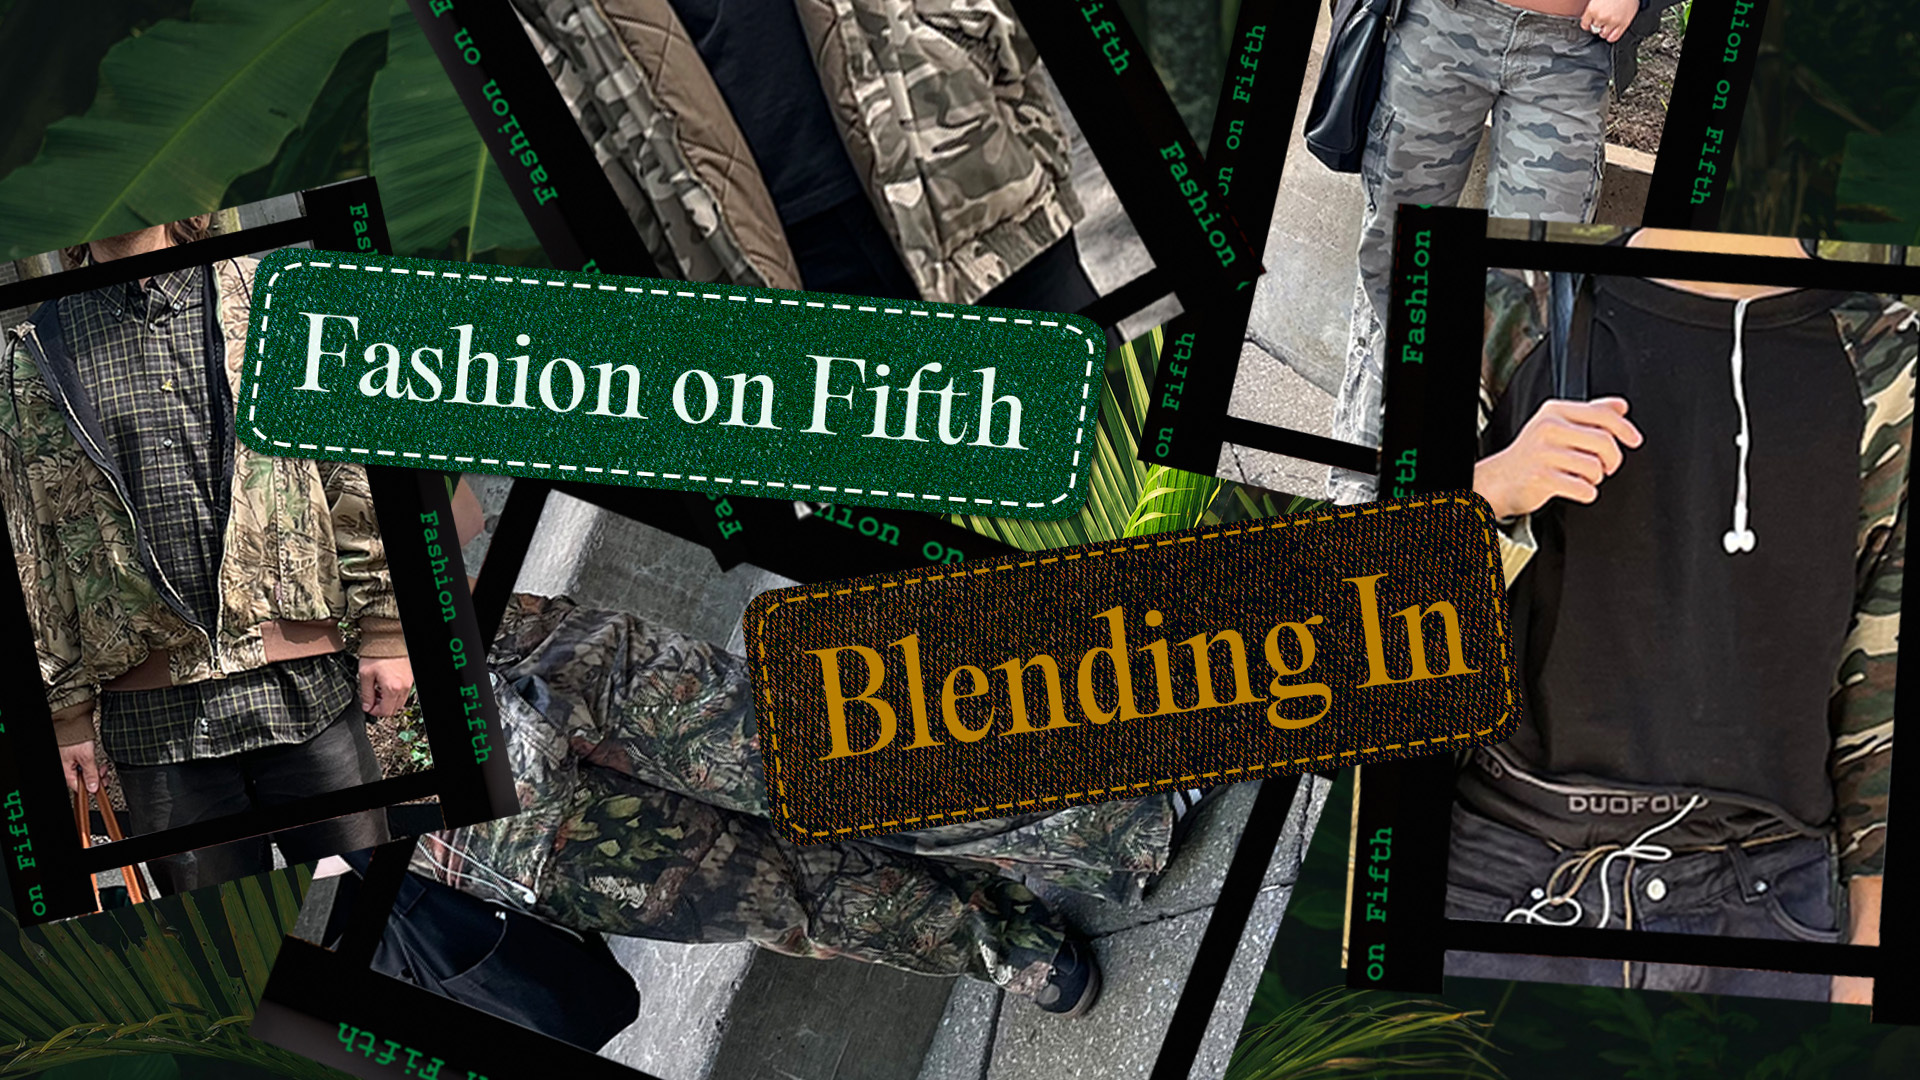 “Fashion on Fifth, Blending In” written on patches that are layered on top of images of camouflage clothing and a camouflage background.